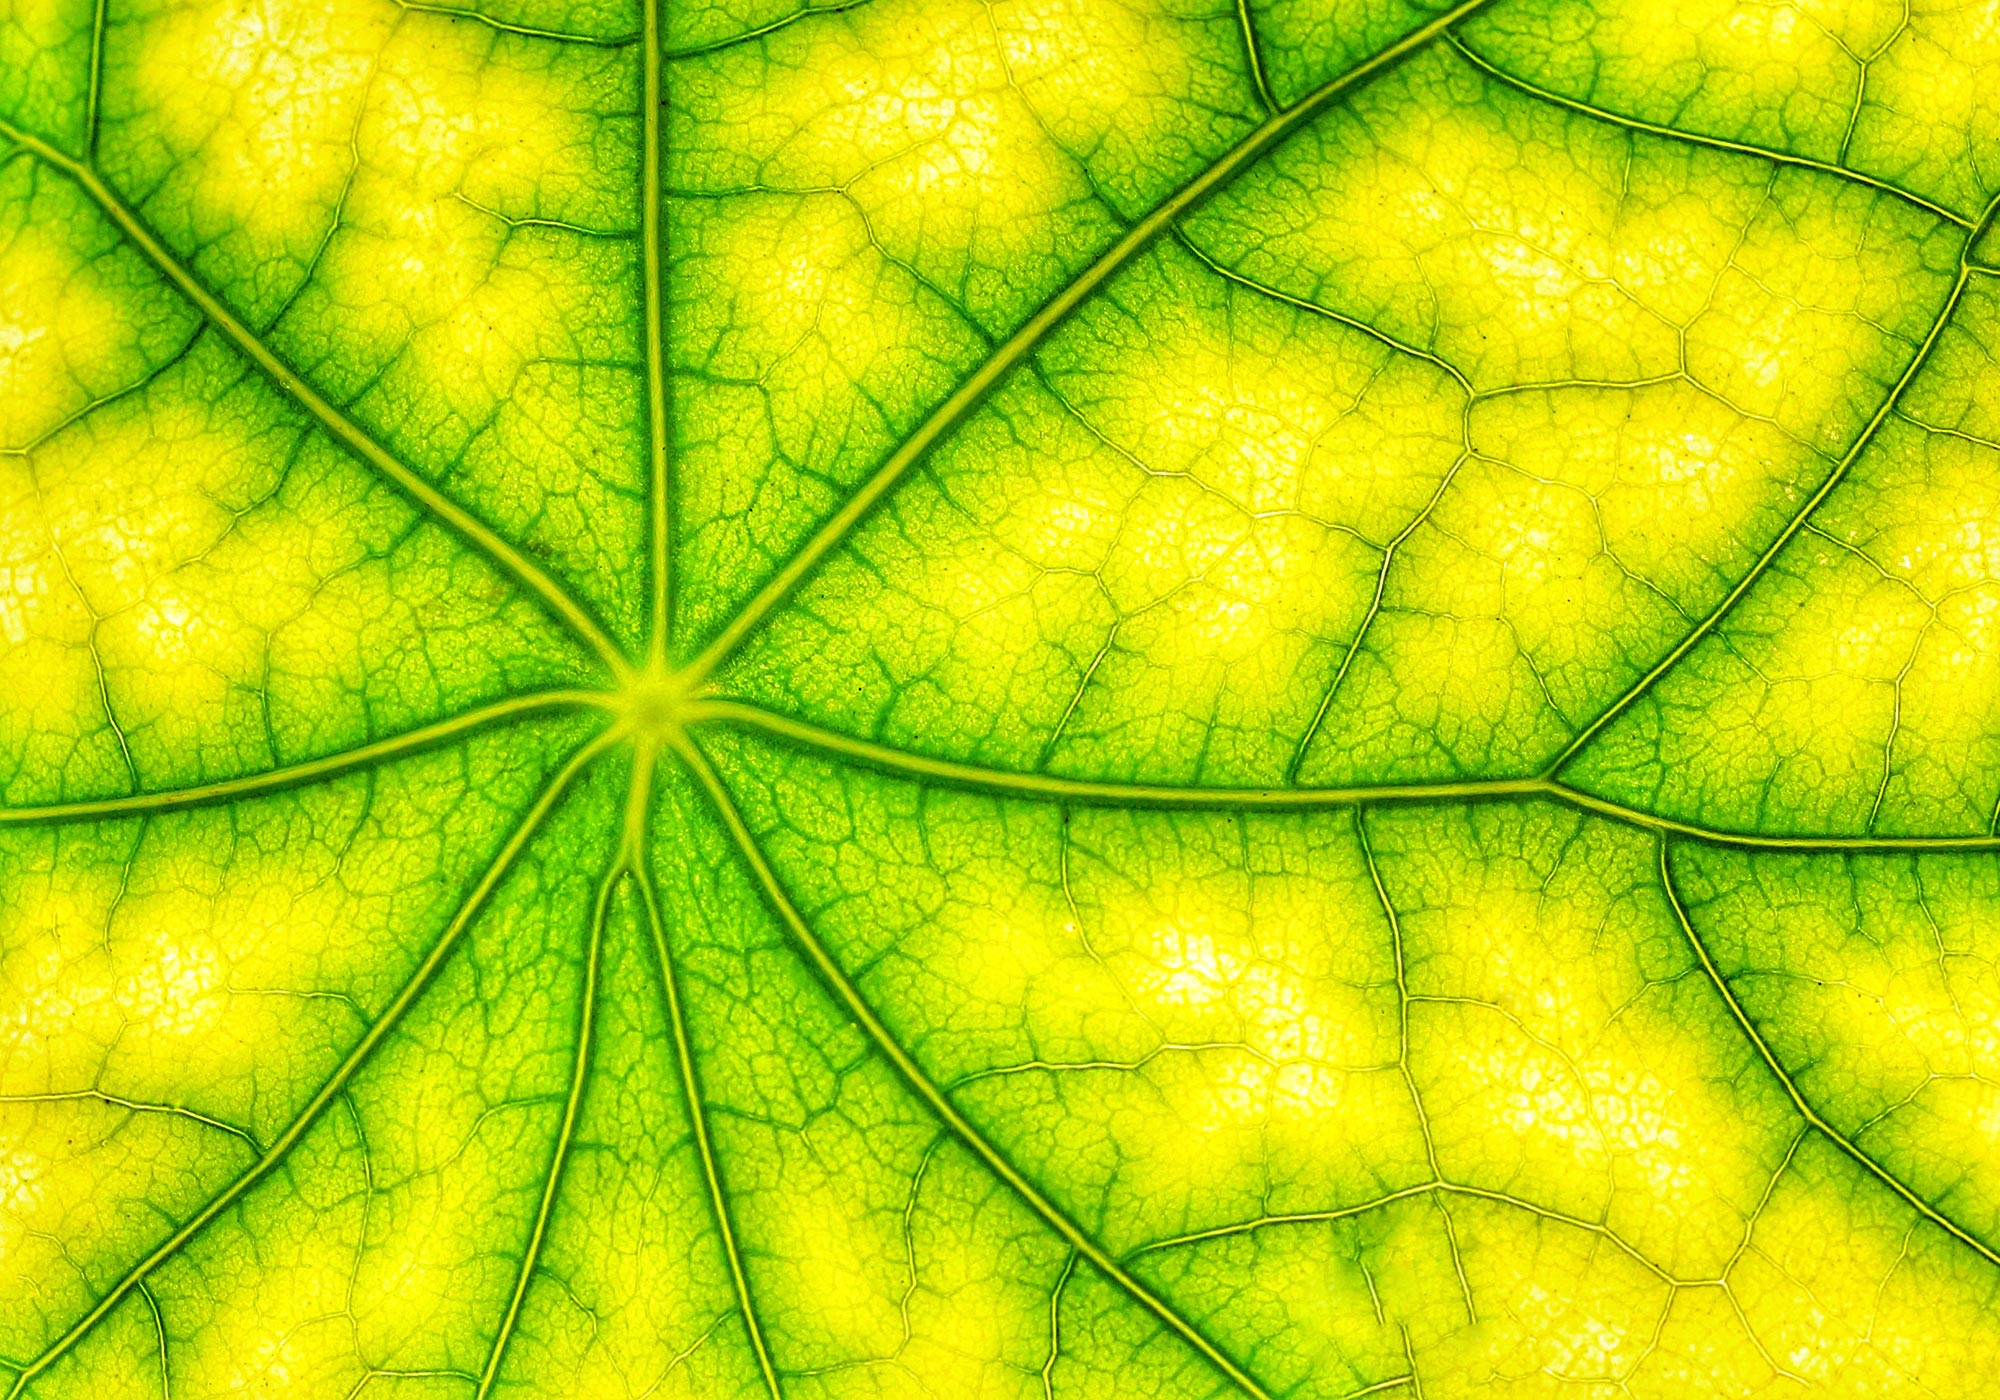 Link Discovered Between Photosynthesis and “Fifth State of Matter”